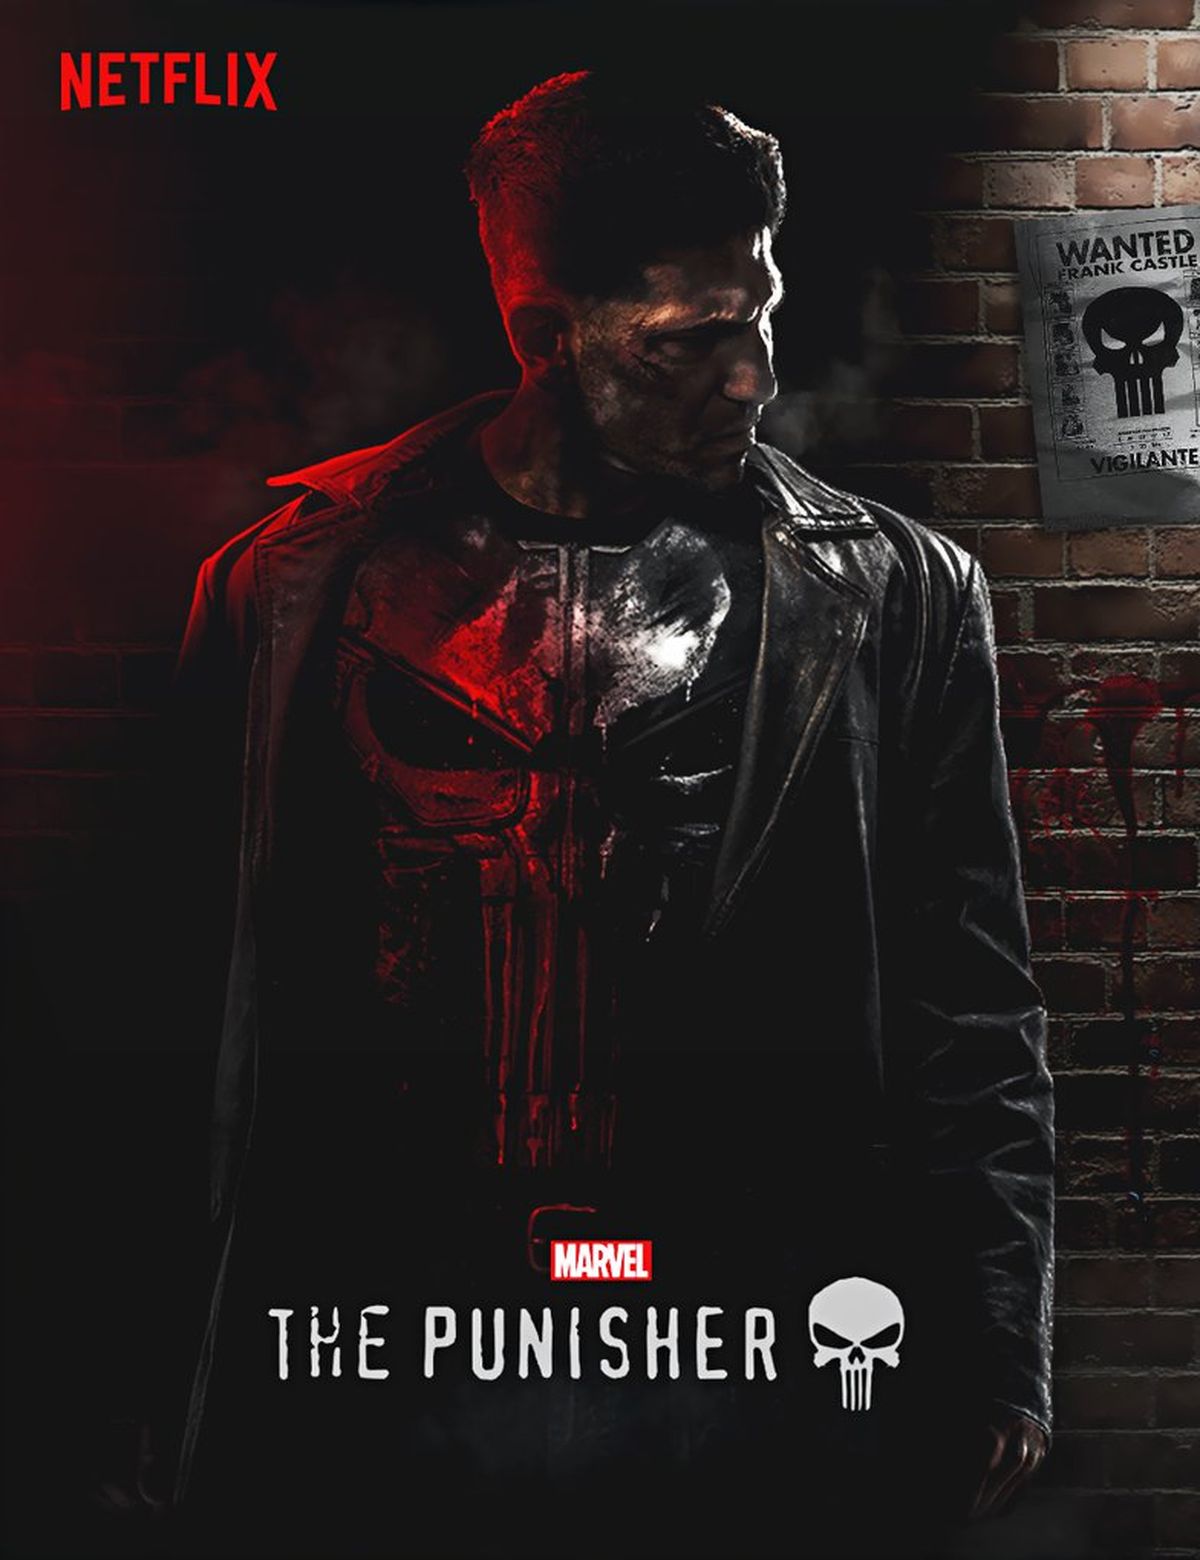 The Punisher Serie Tv Hobby Consolas